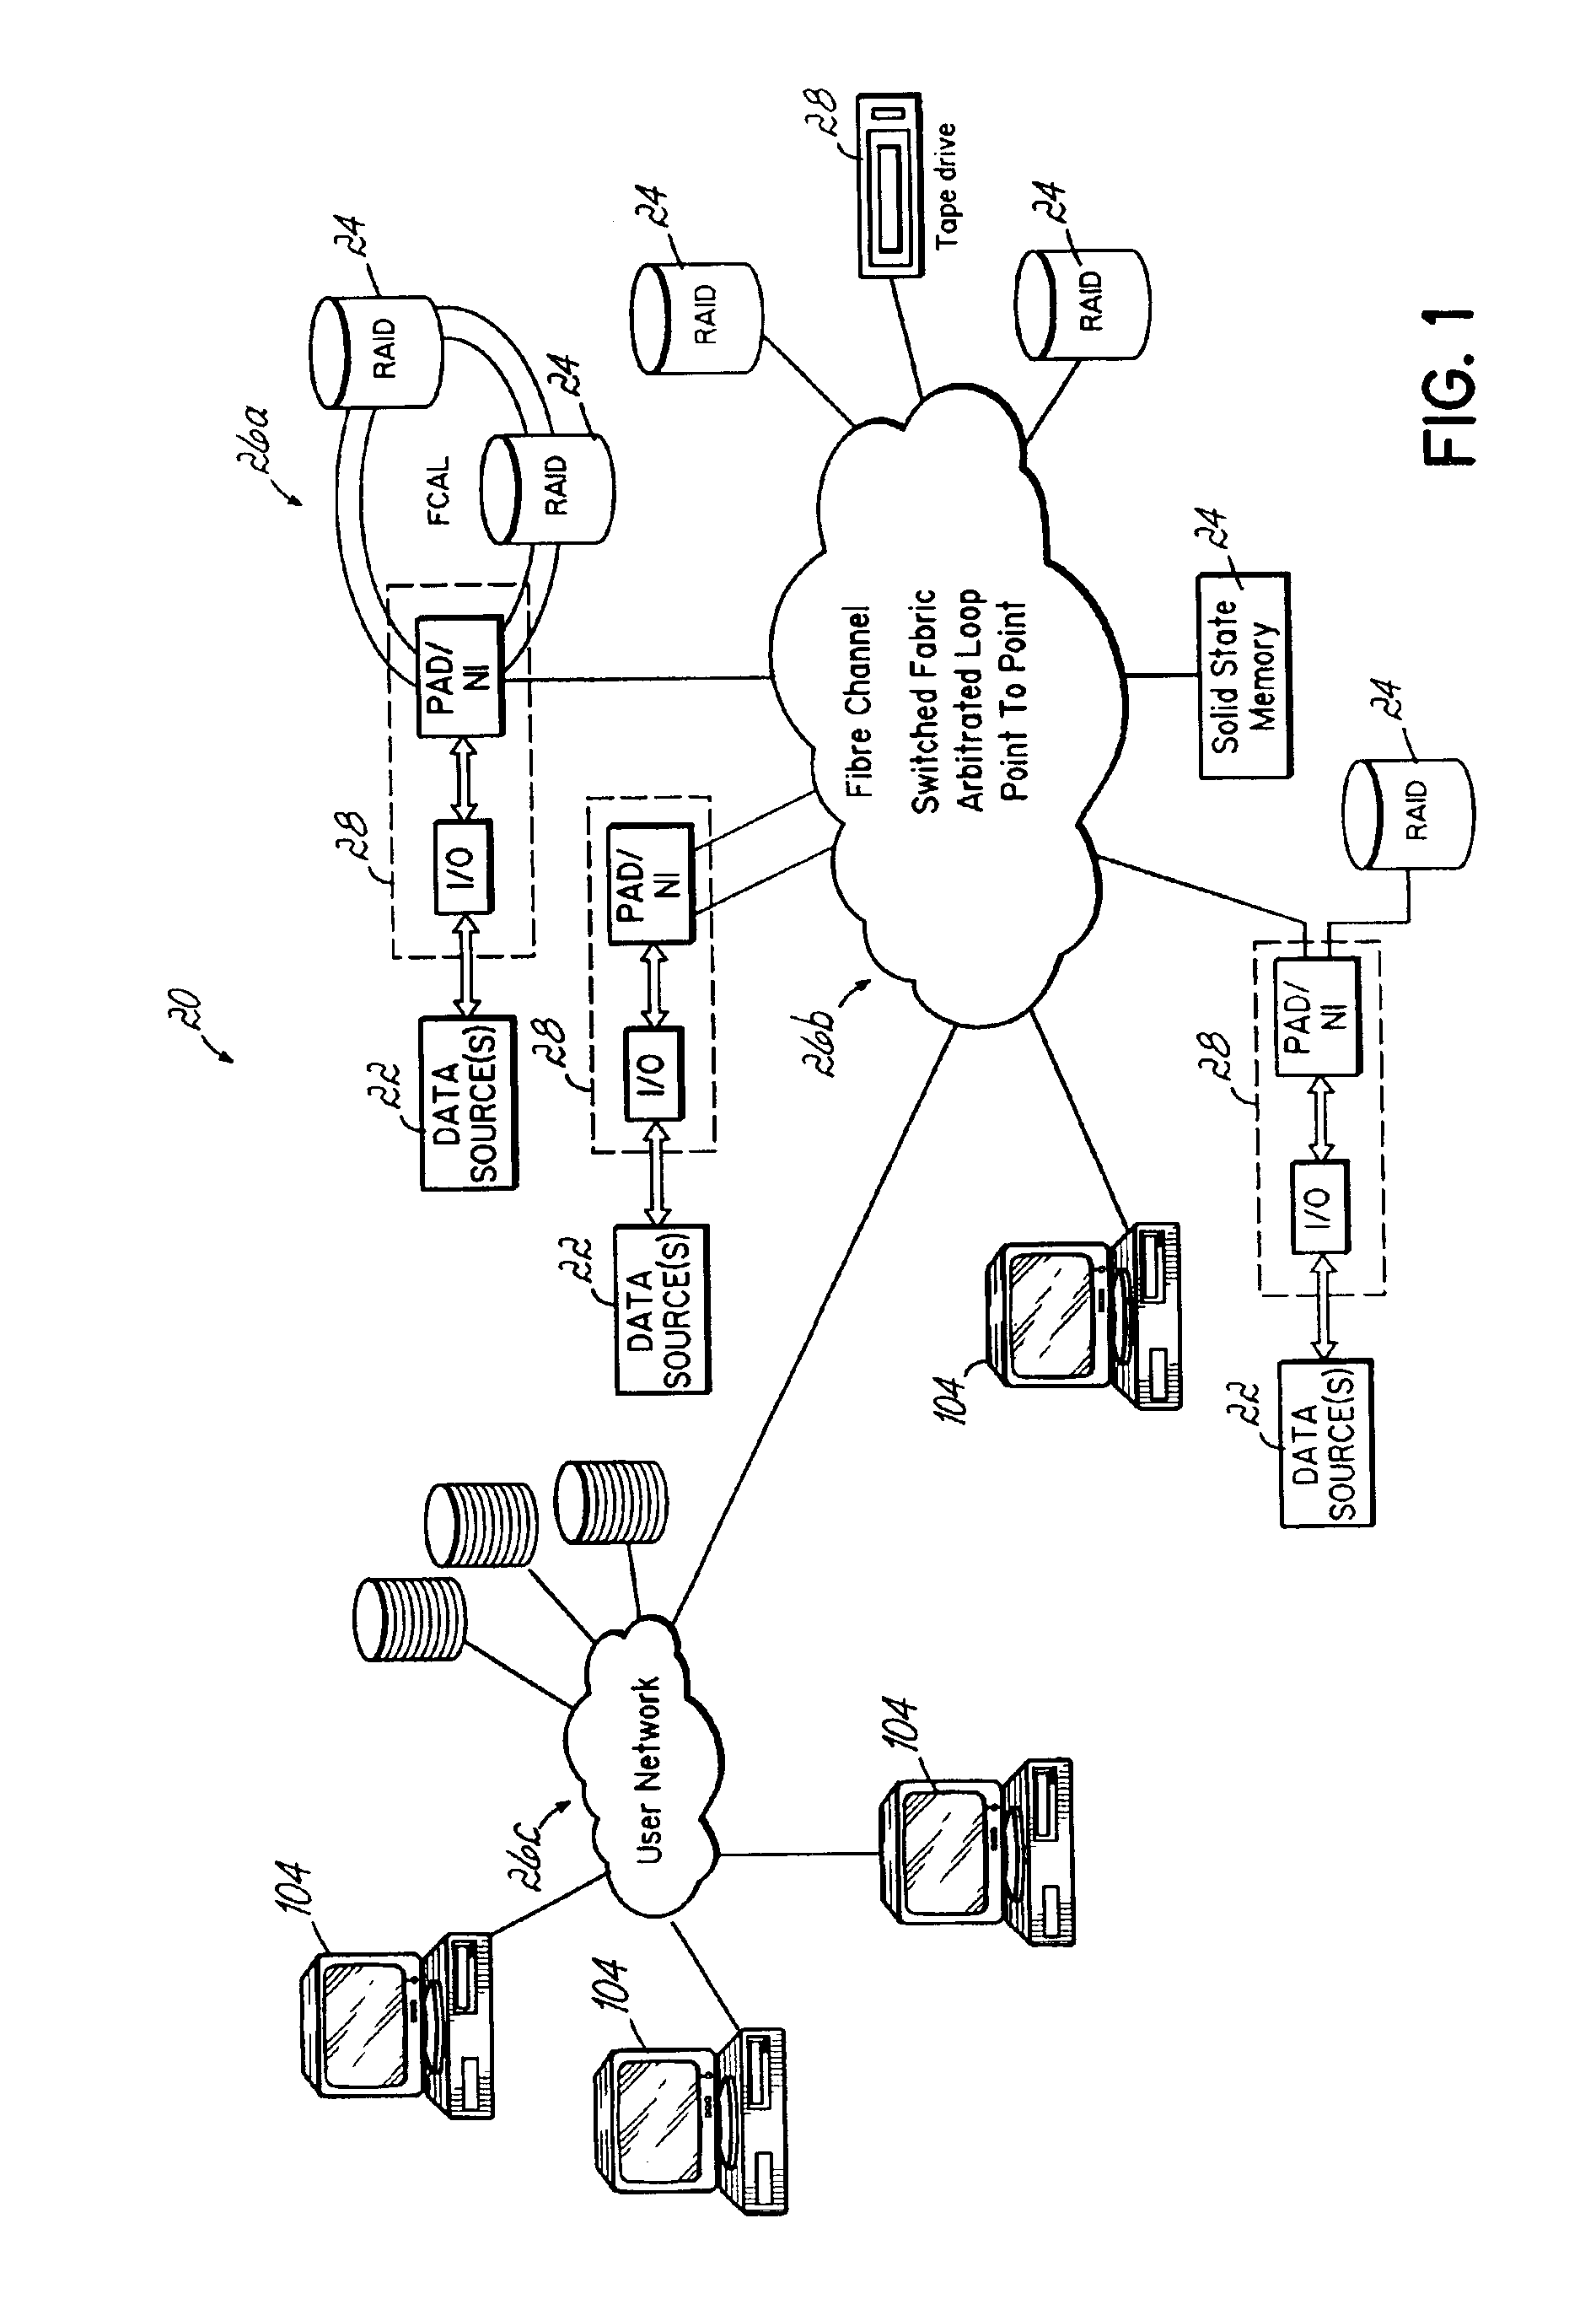 Real-time data acquisition and storage network